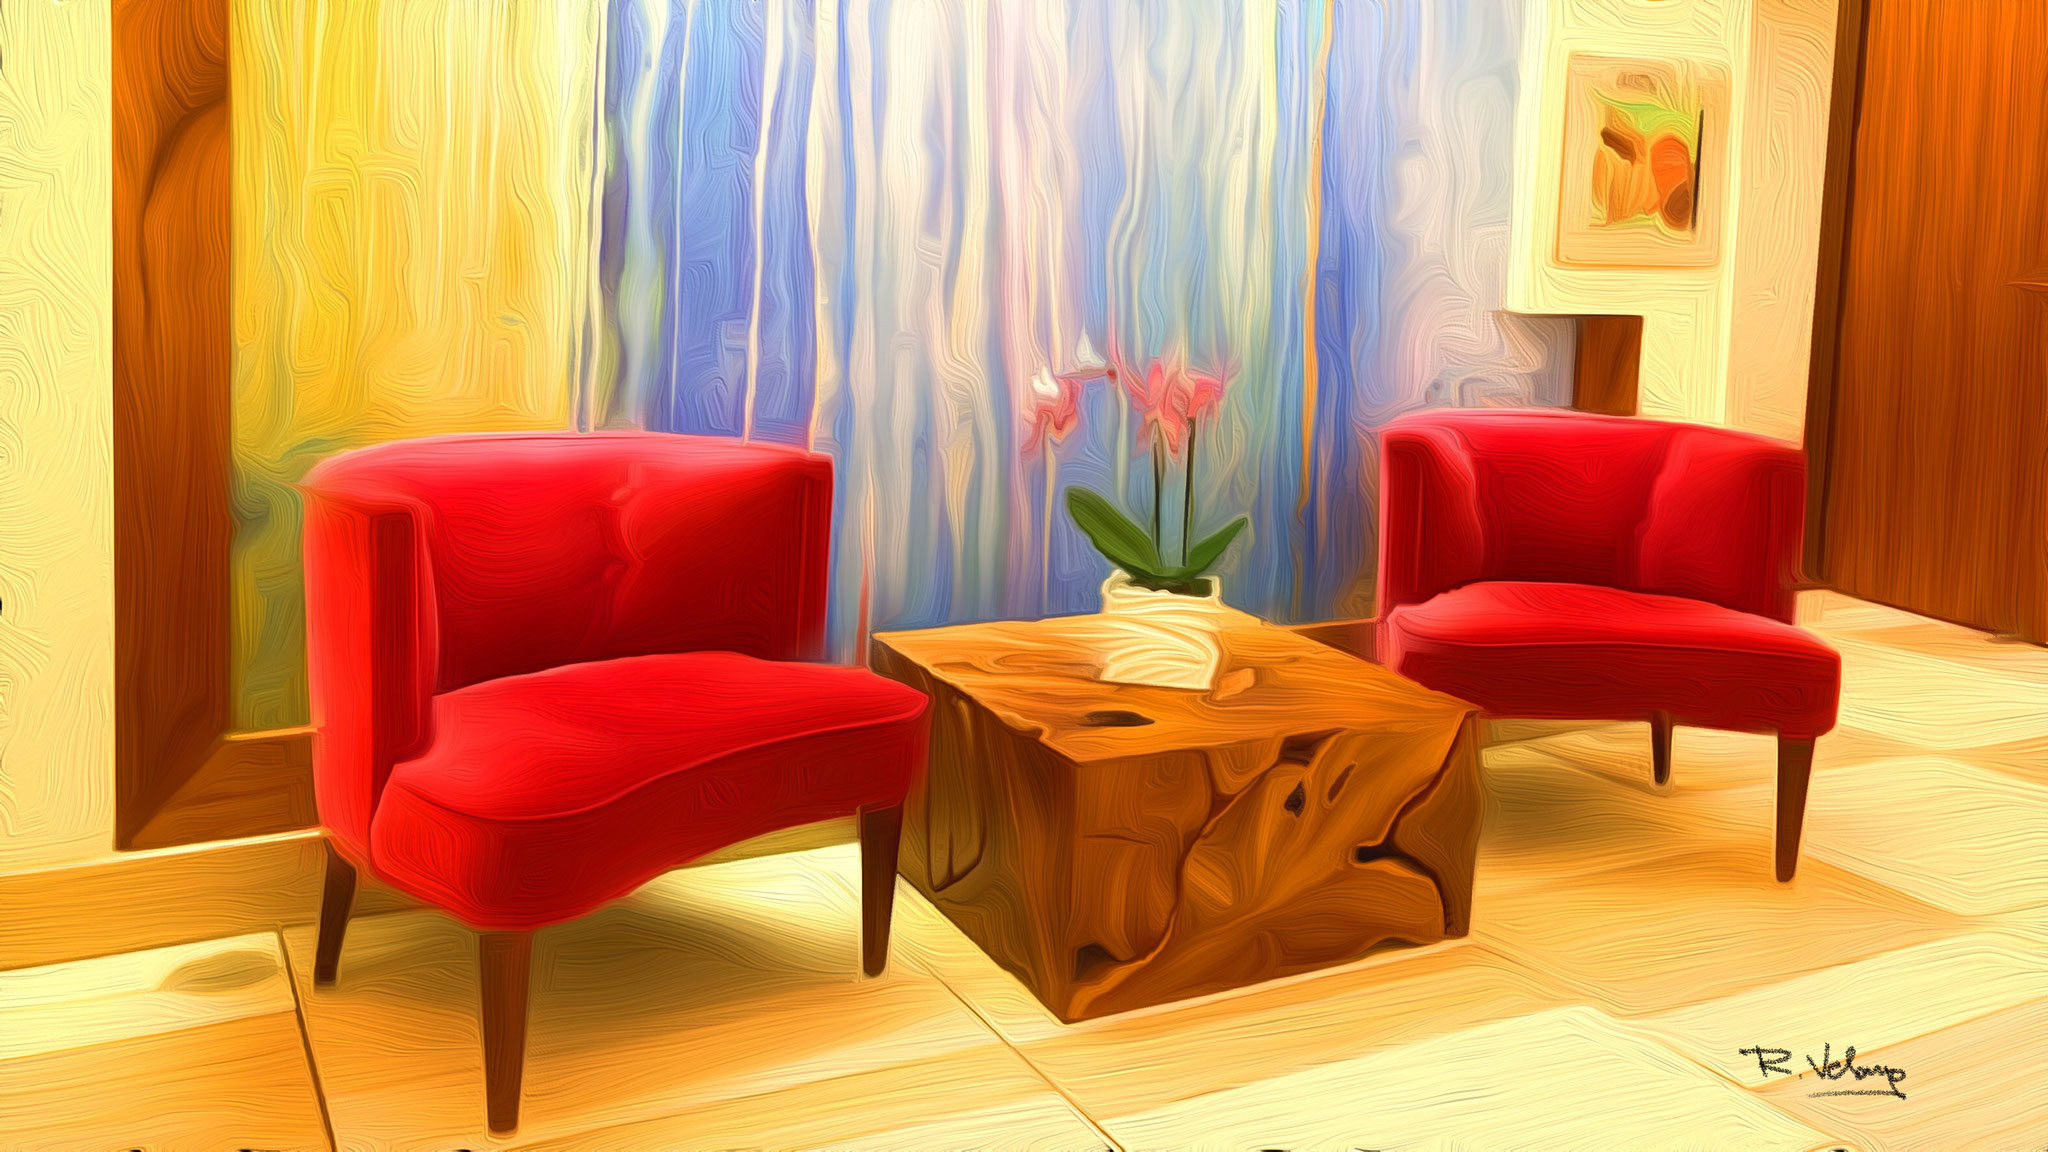 "TWO RED CHAIRS IN LOBBY OF THE HYATT GRAND CYPRESS RESORT" [Created: 2/28/20]